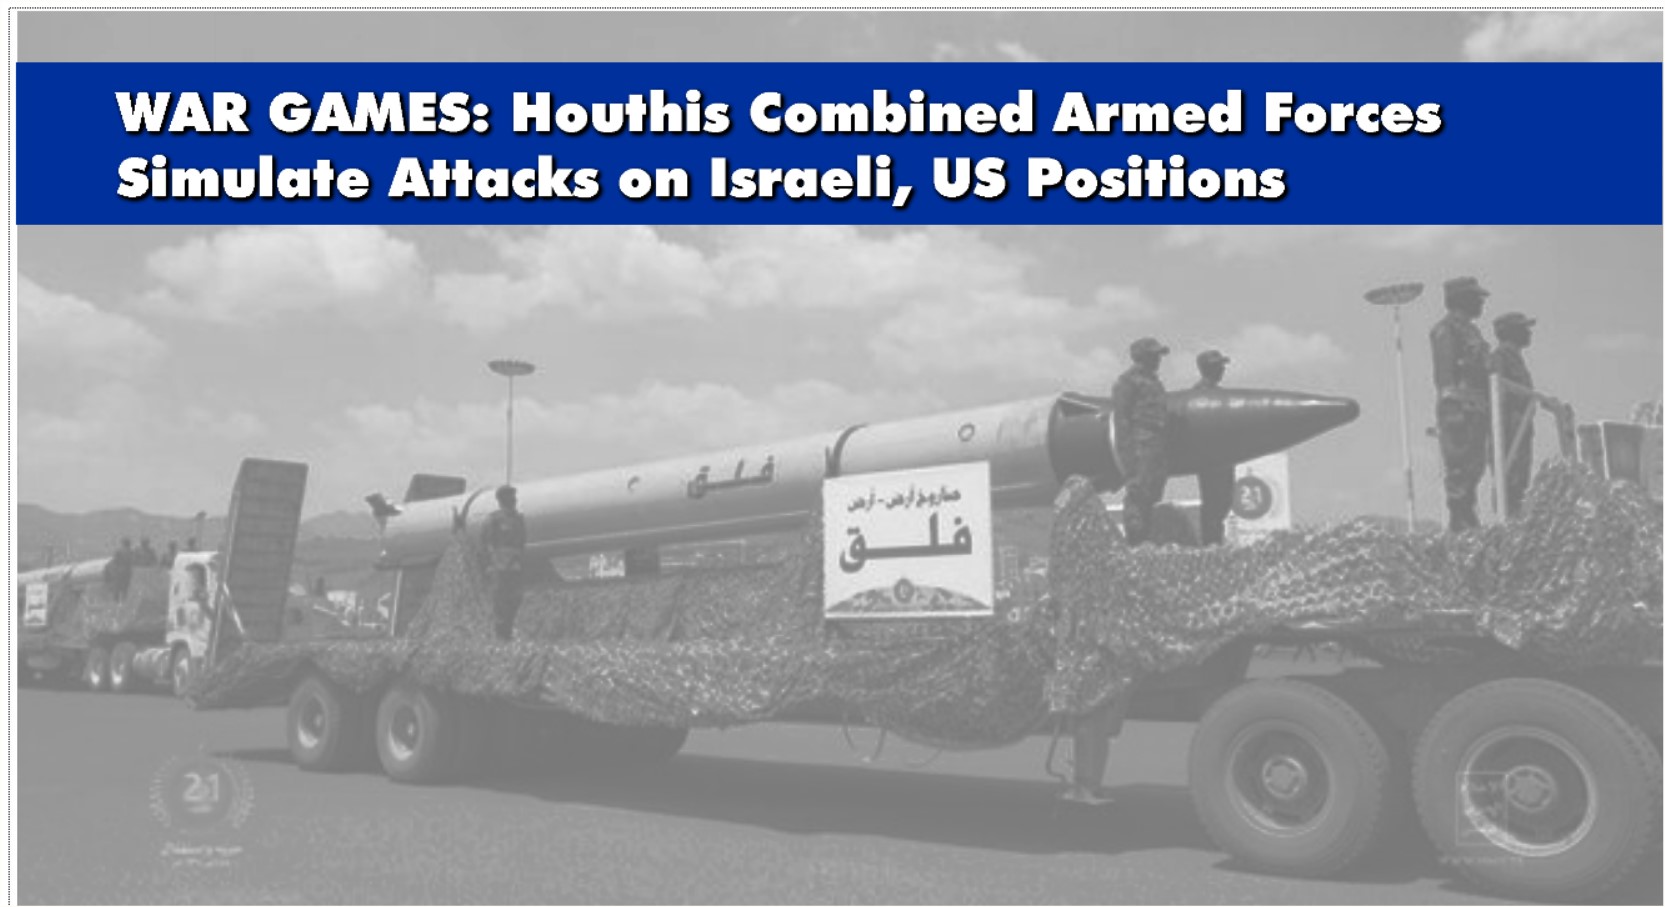 You are currently viewing WAR GAMES: Houthis Combined Armed Forces Simulate Attacks on Israeli, US Positions